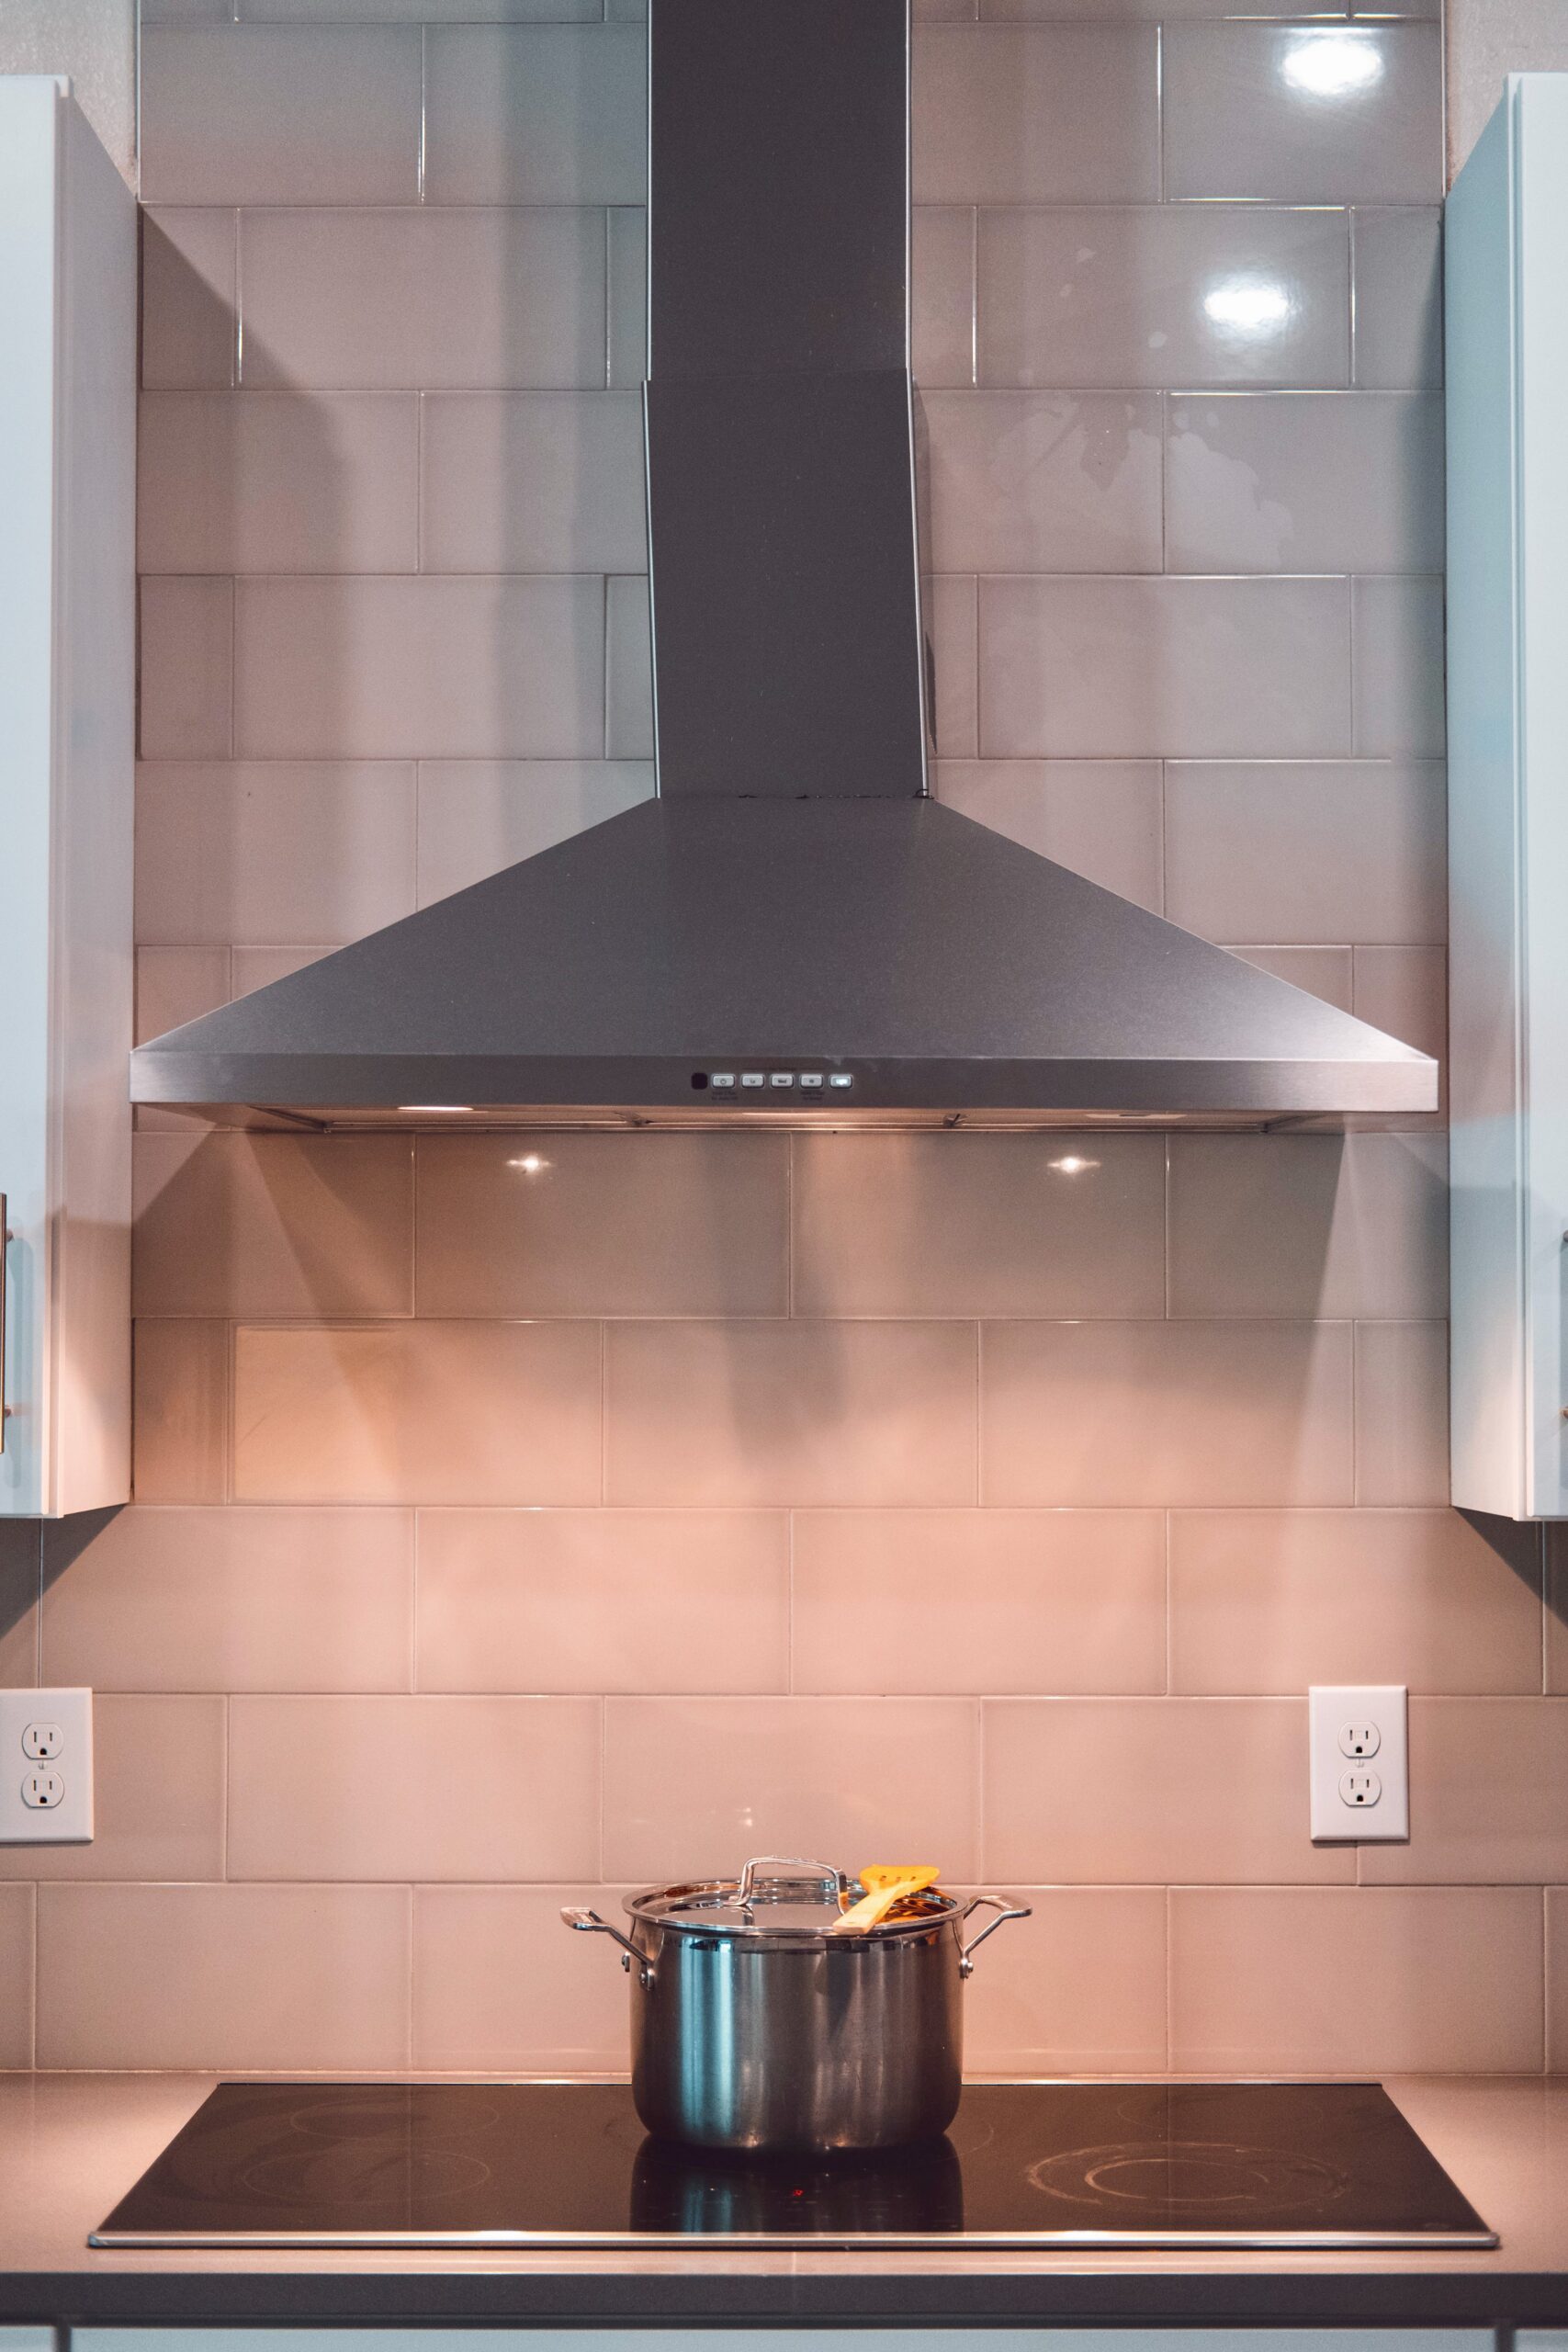 Photo of a kitchen stovetop with a pot on it and a range hood above it.